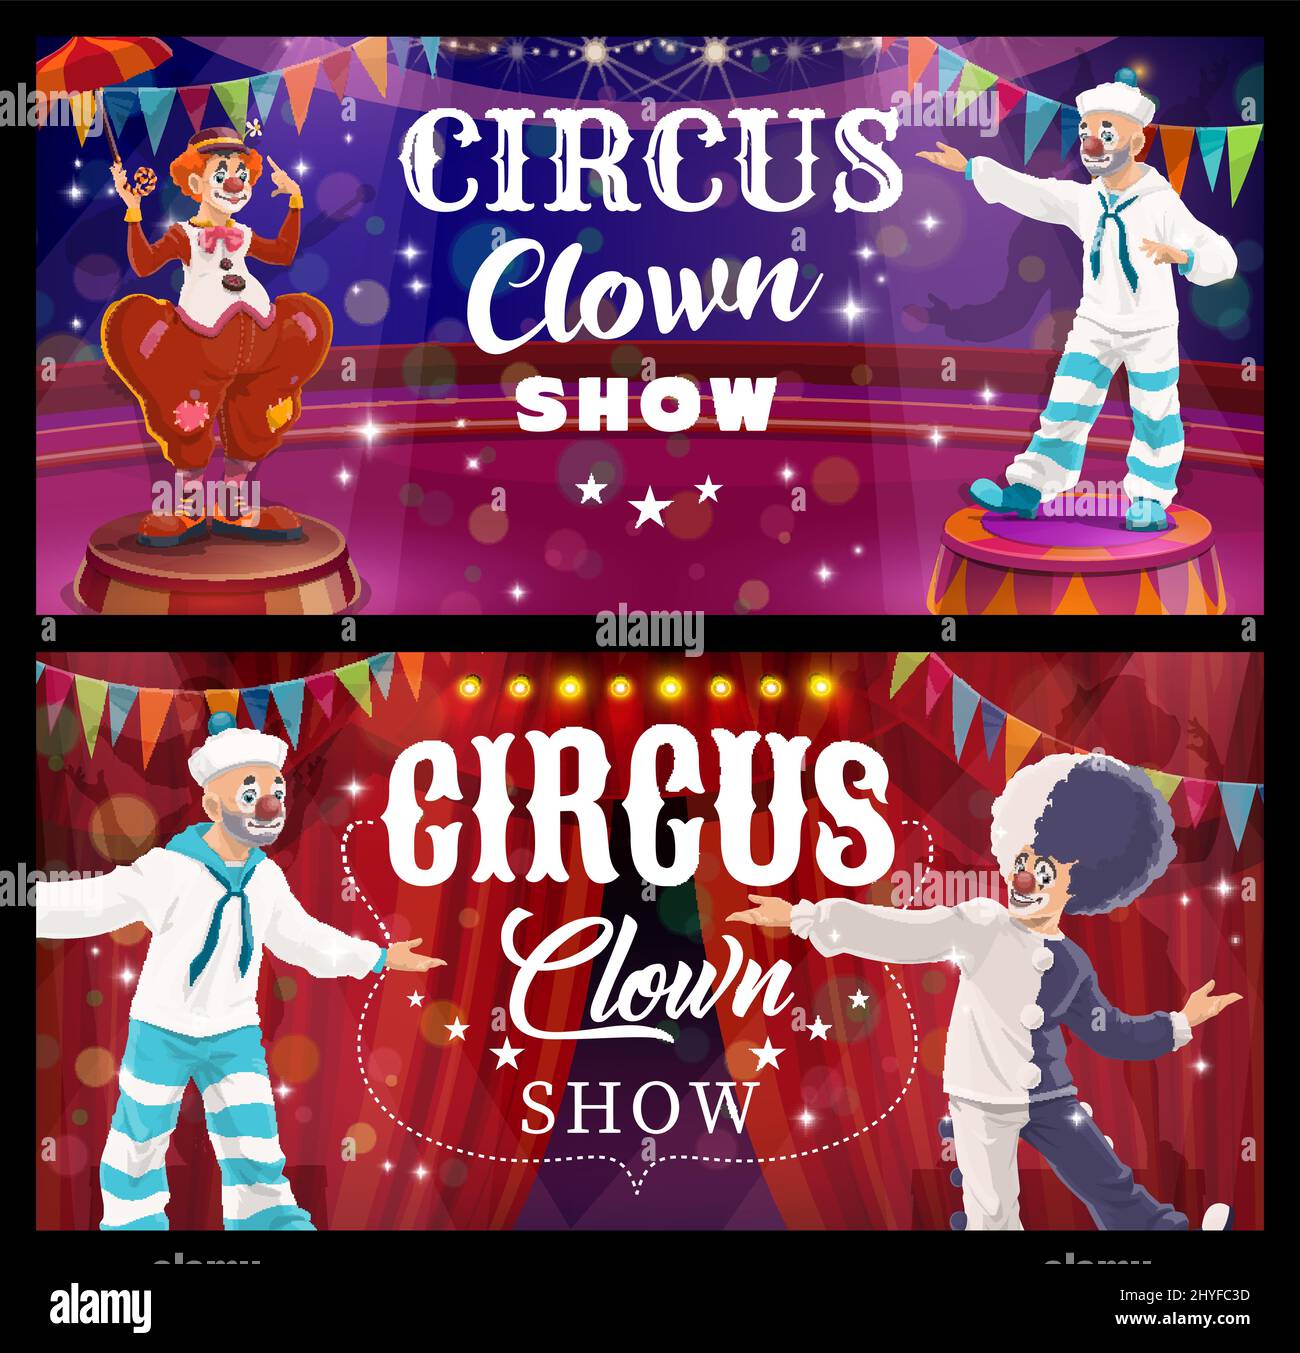 Shapito circus clown cartoon vector characters performing comedy show on stage of amusement park or funfair. Funny jester or comic entertainer with wigs, red noses and umbrella, lights and flags Stock Vector